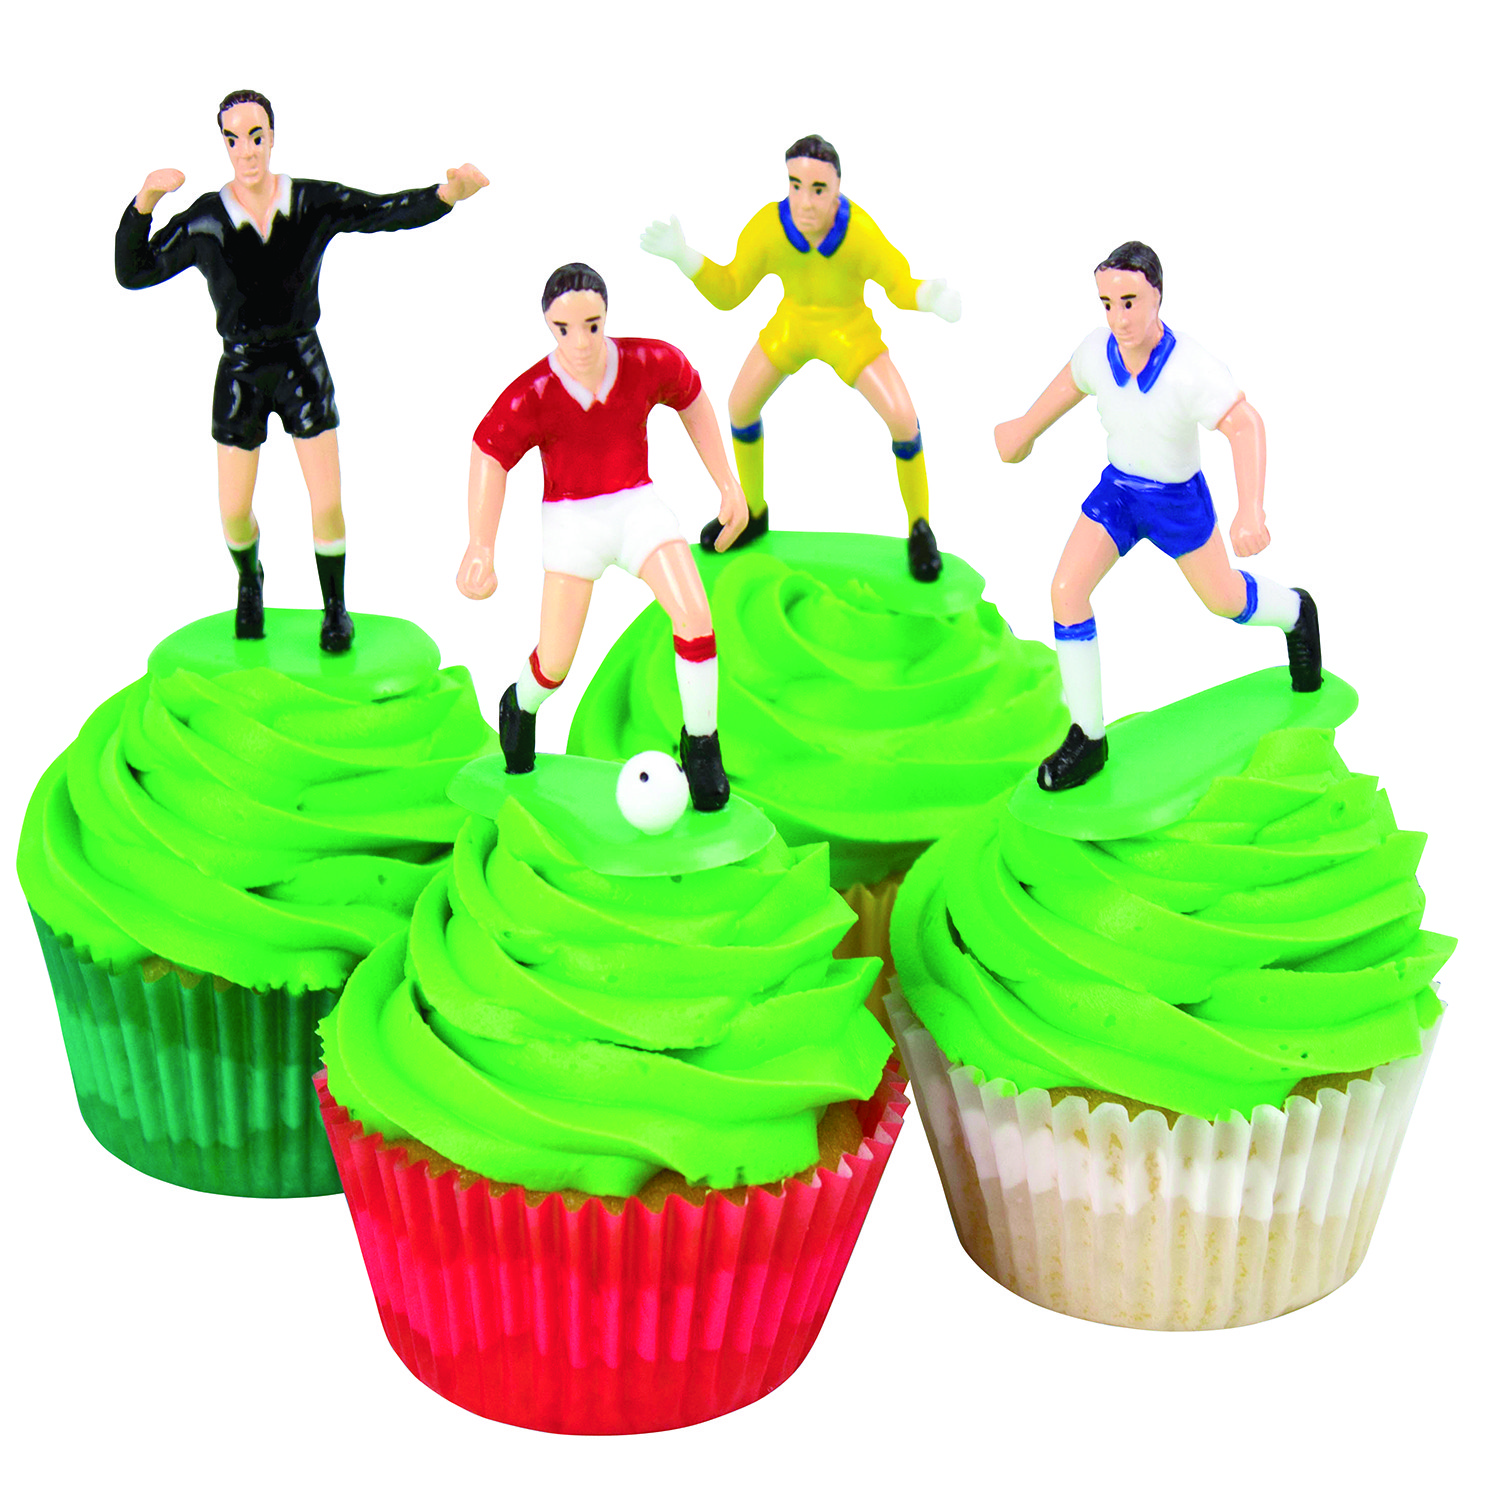 Pack of 9 Football Cake Toppers Image 3